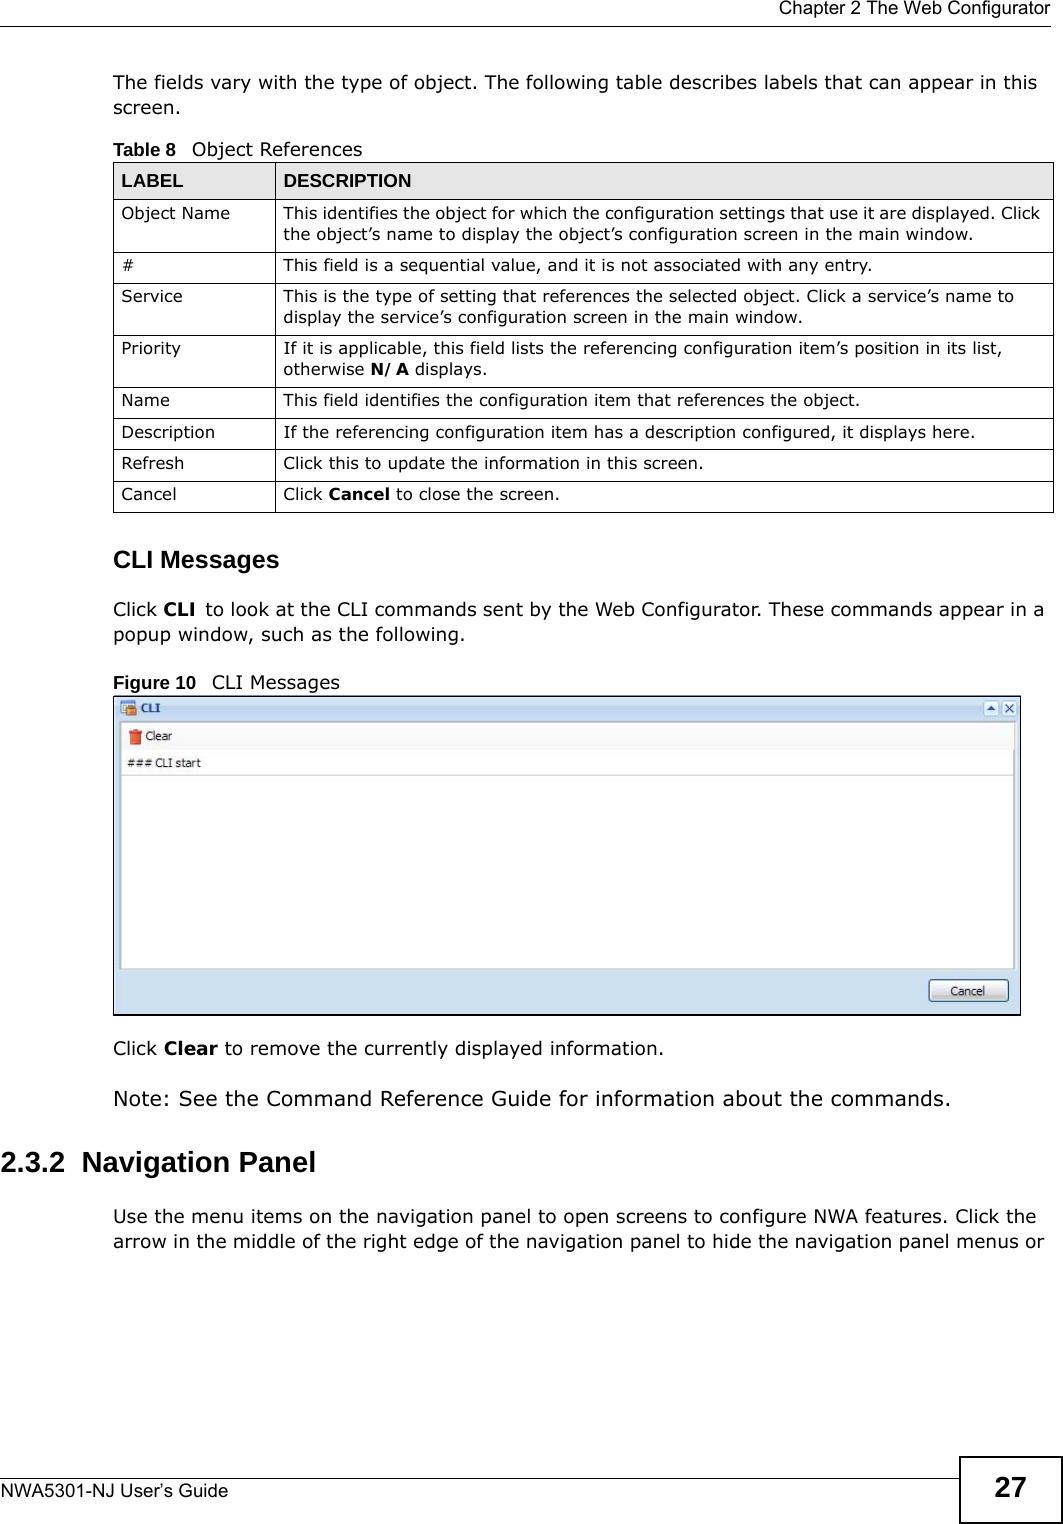  Chapter 2 The Web ConfiguratorNWA5301-NJ User’s Guide 27The fields vary with the type of object. The following table describes labels that can appear in this screen.CLI MessagesClick CLI to look at the CLI commands sent by the Web Configurator. These commands appear in a popup window, such as the following.Figure 10   CLI MessagesClick Clear to remove the currently displayed information.Note: See the Command Reference Guide for information about the commands.2.3.2  Navigation PanelUse the menu items on the navigation panel to open screens to configure NWA features. Click the arrow in the middle of the right edge of the navigation panel to hide the navigation panel menus or Table 8   Object ReferencesLABEL DESCRIPTIONObject Name This identifies the object for which the configuration settings that use it are displayed. Click the object’s name to display the object’s configuration screen in the main window.# This field is a sequential value, and it is not associated with any entry.Service This is the type of setting that references the selected object. Click a service’s name to display the service’s configuration screen in the main window.Priority If it is applicable, this field lists the referencing configuration item’s position in its list, otherwise N/A displays.Name This field identifies the configuration item that references the object.Description If the referencing configuration item has a description configured, it displays here. Refresh Click this to update the information in this screen.Cancel Click Cancel to close the screen.